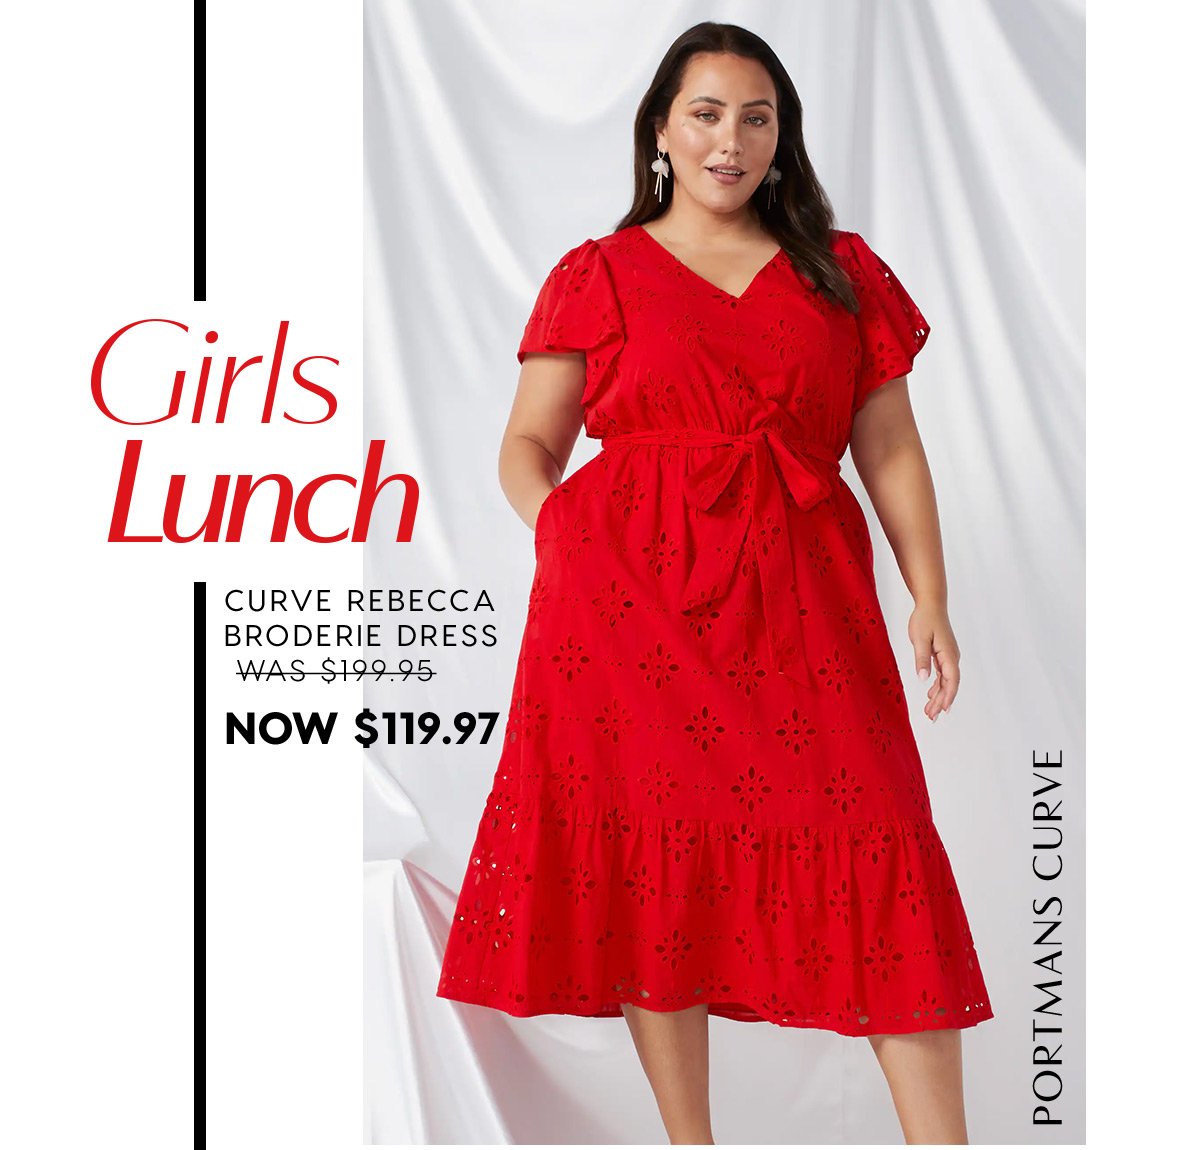 Girls Lunch.Curve Rebecca Broderie Dress   WAS $199.95 NOW $119.97